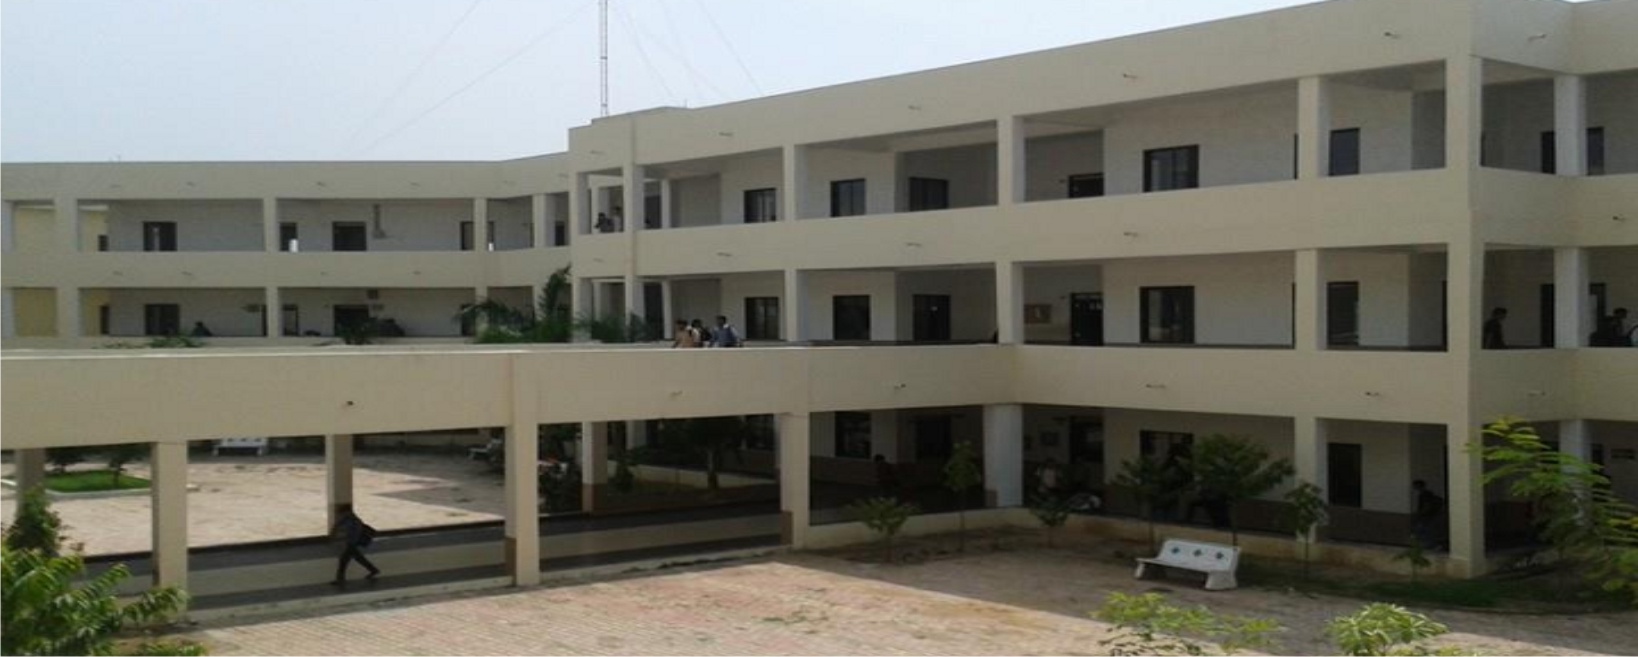 Ipcowala Institute of Engineering& Technology